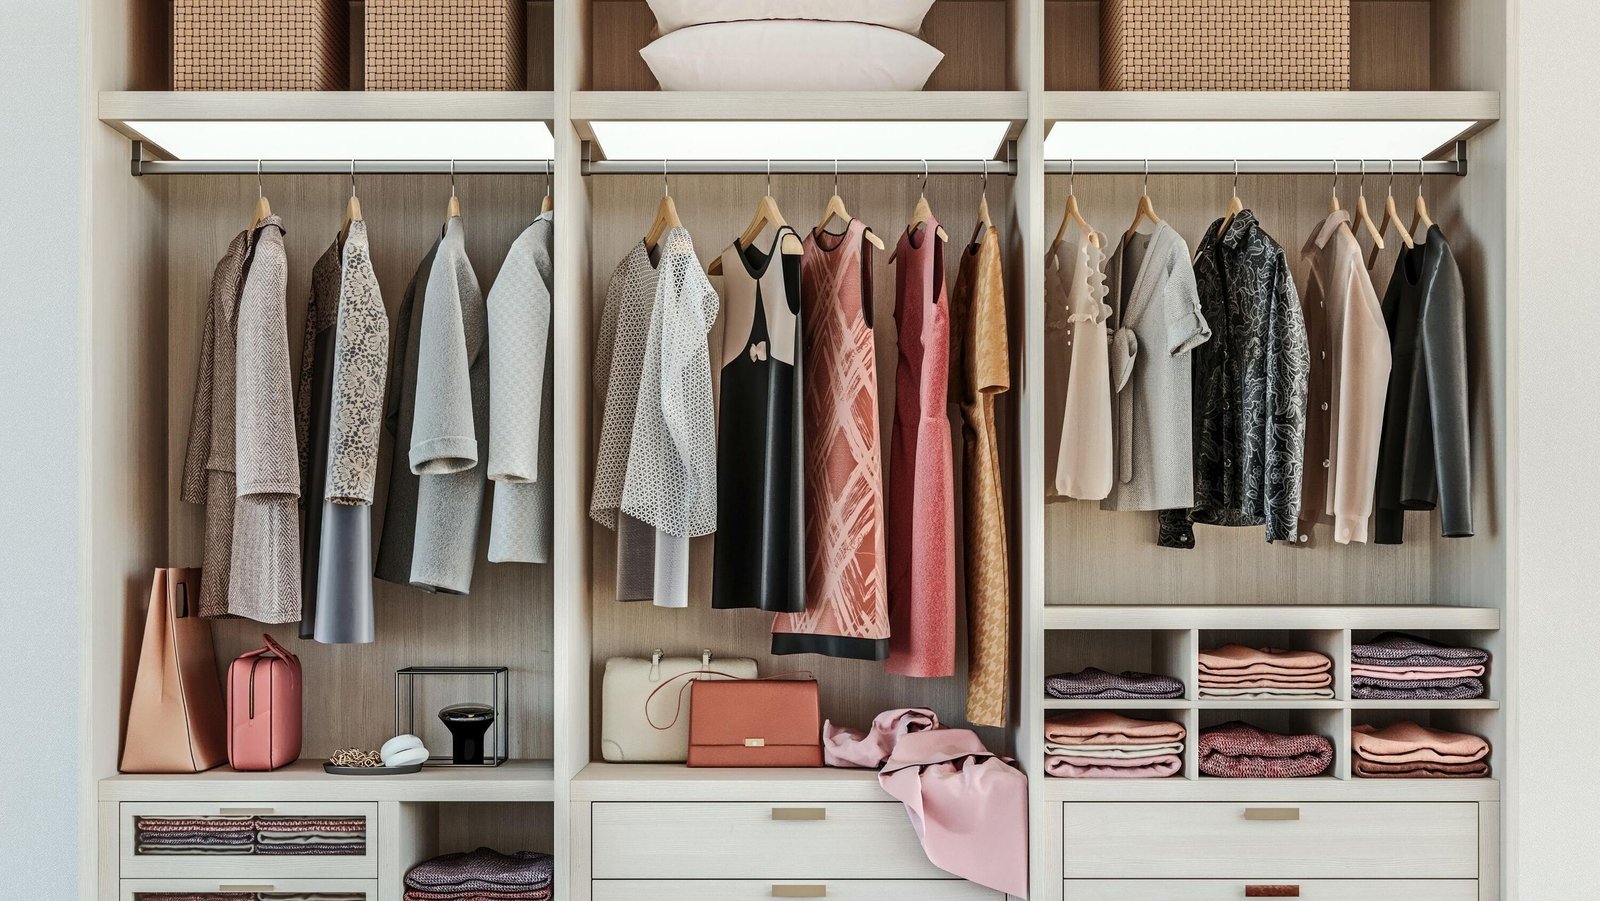 How to organise your wardrobe in 7 simple steps